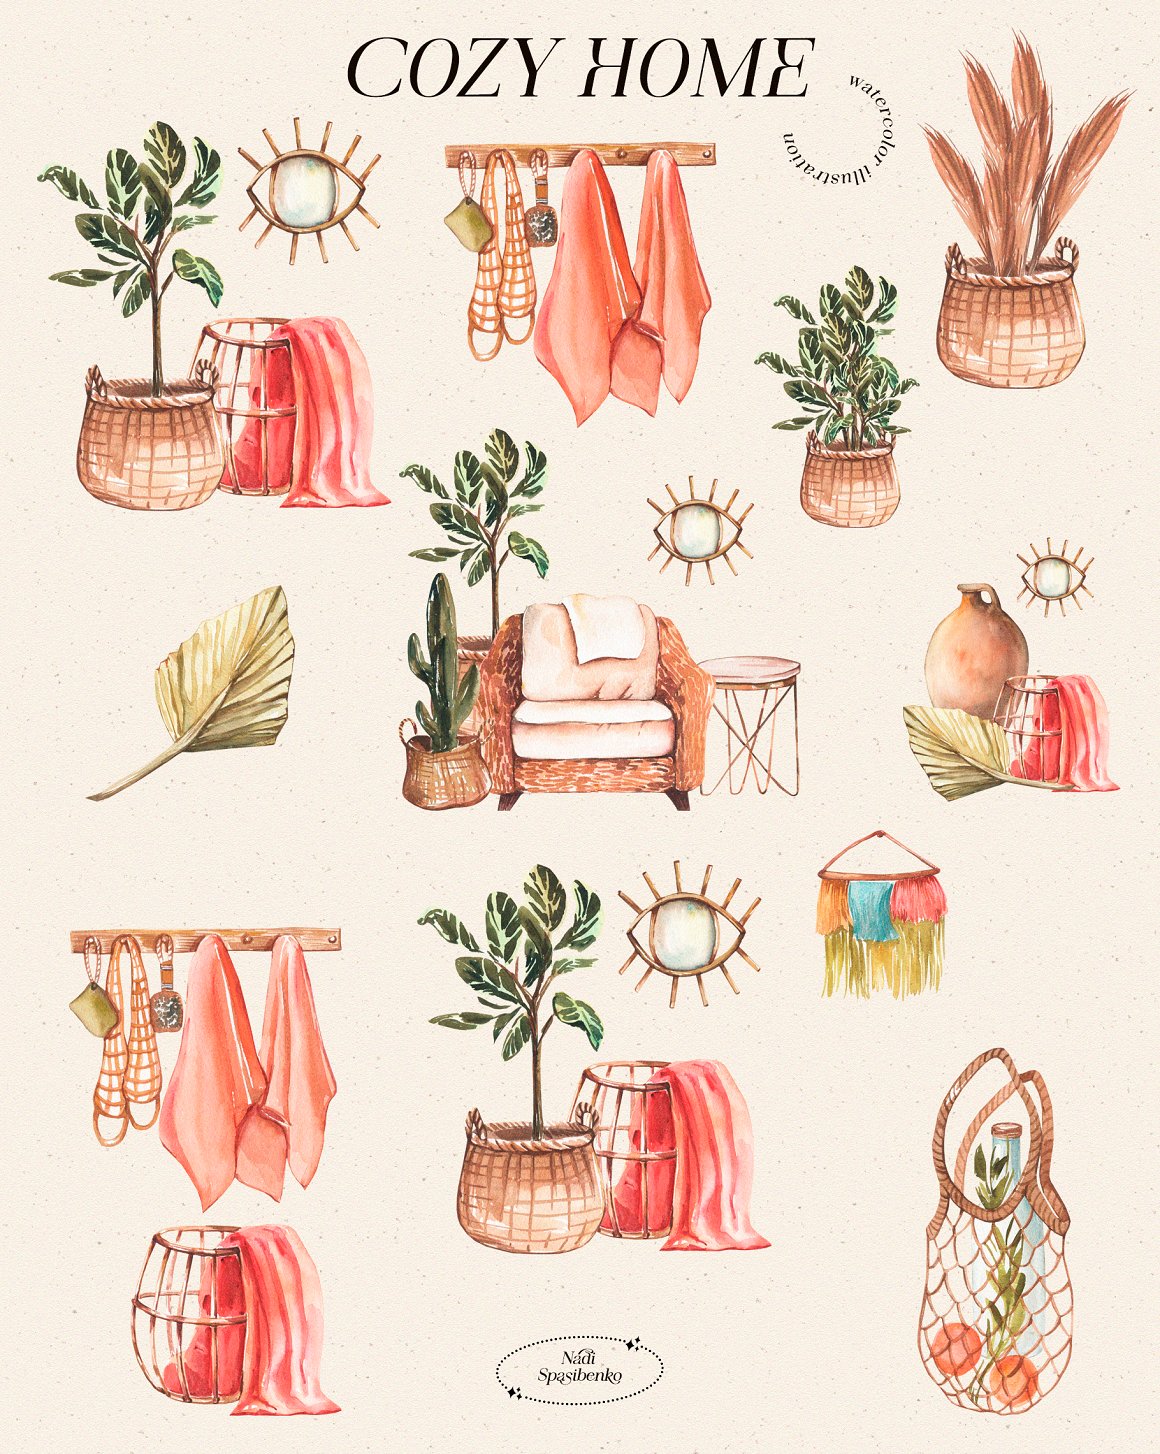 Pretty illustrations of different elements of furniture and decor.